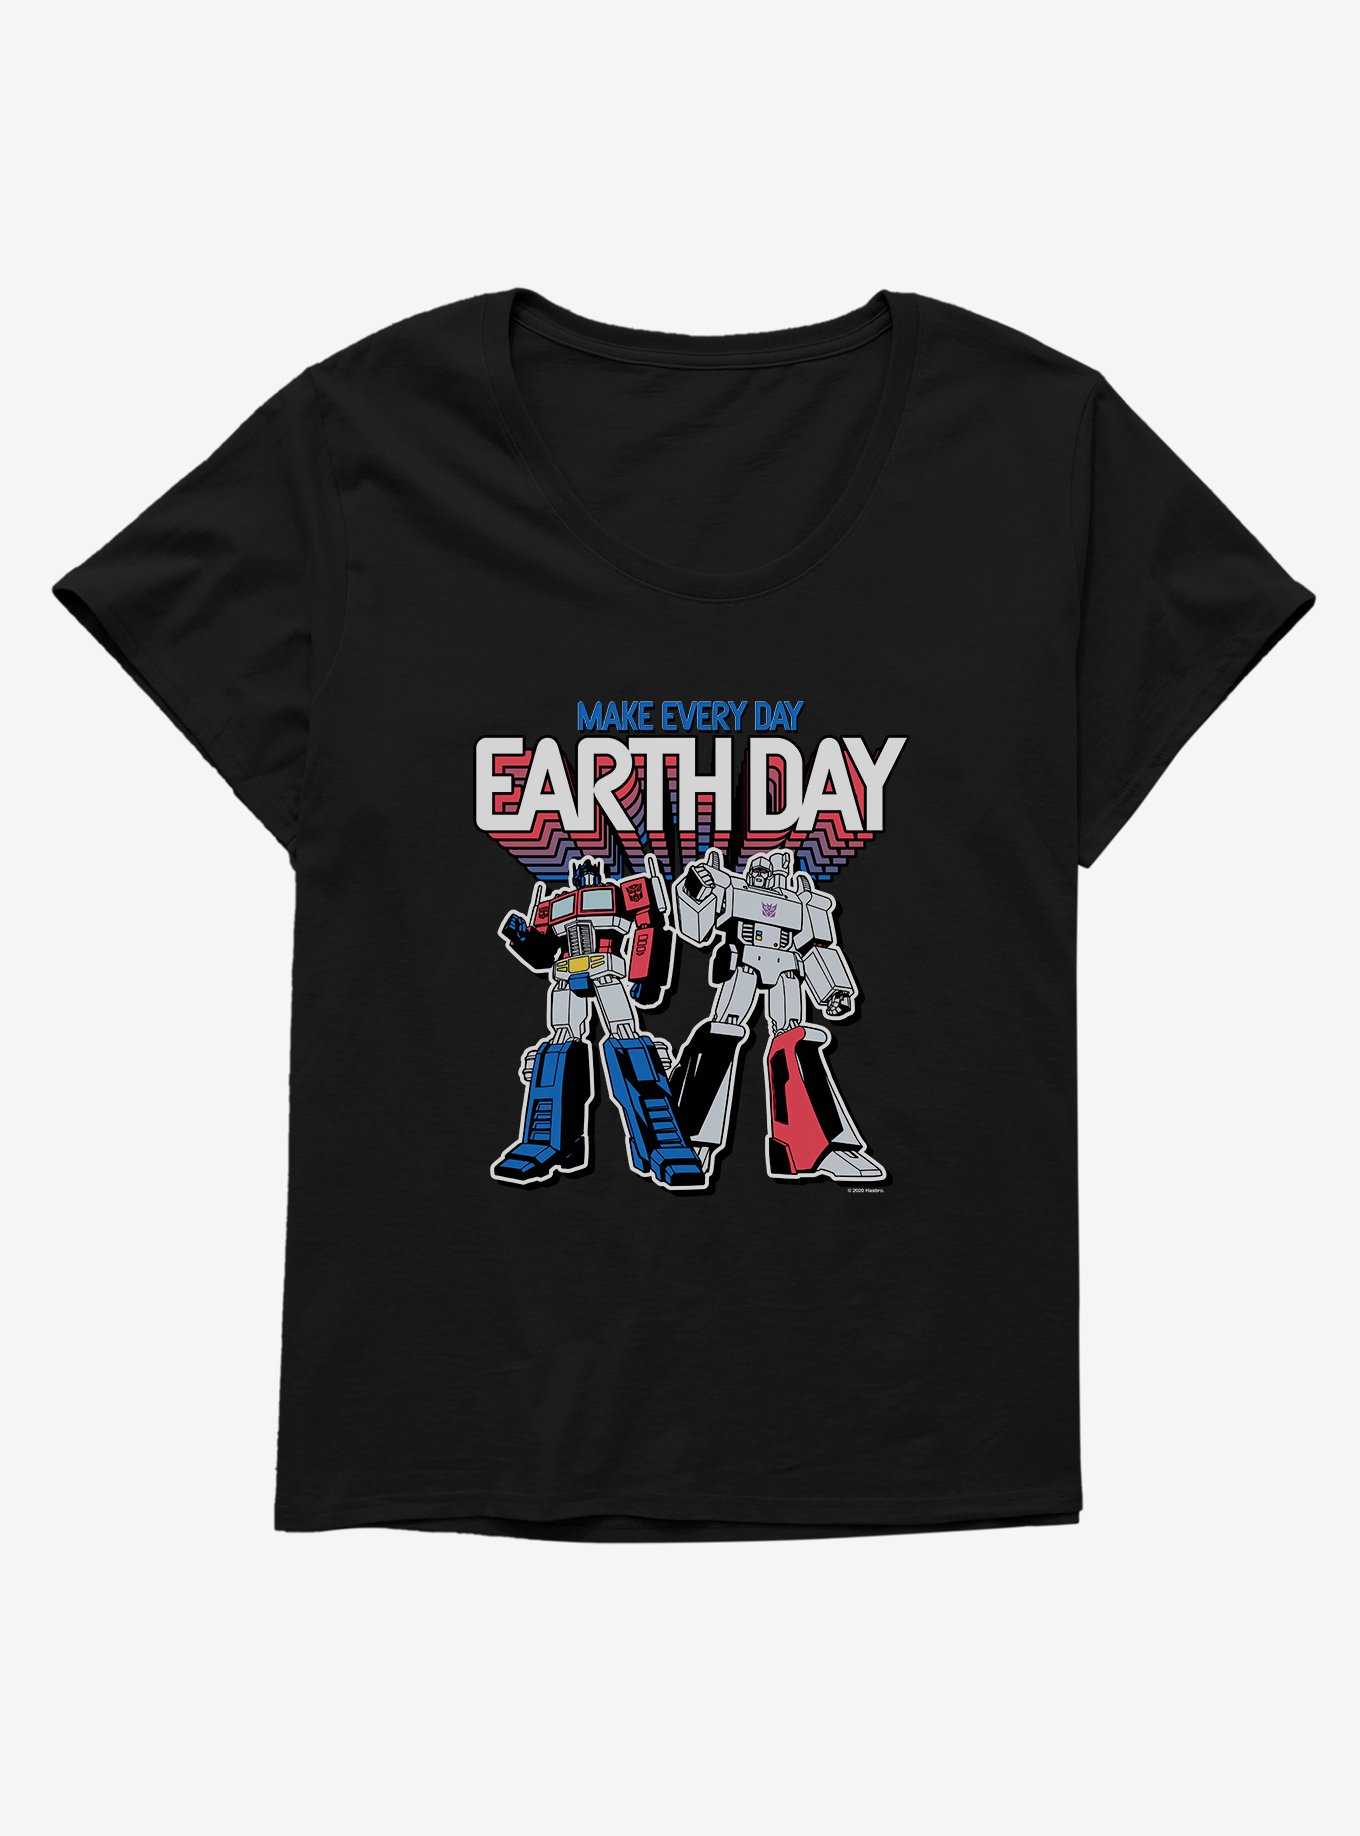 Transformers Earth Day Girls T-Shirt Plus Size, , hi-res